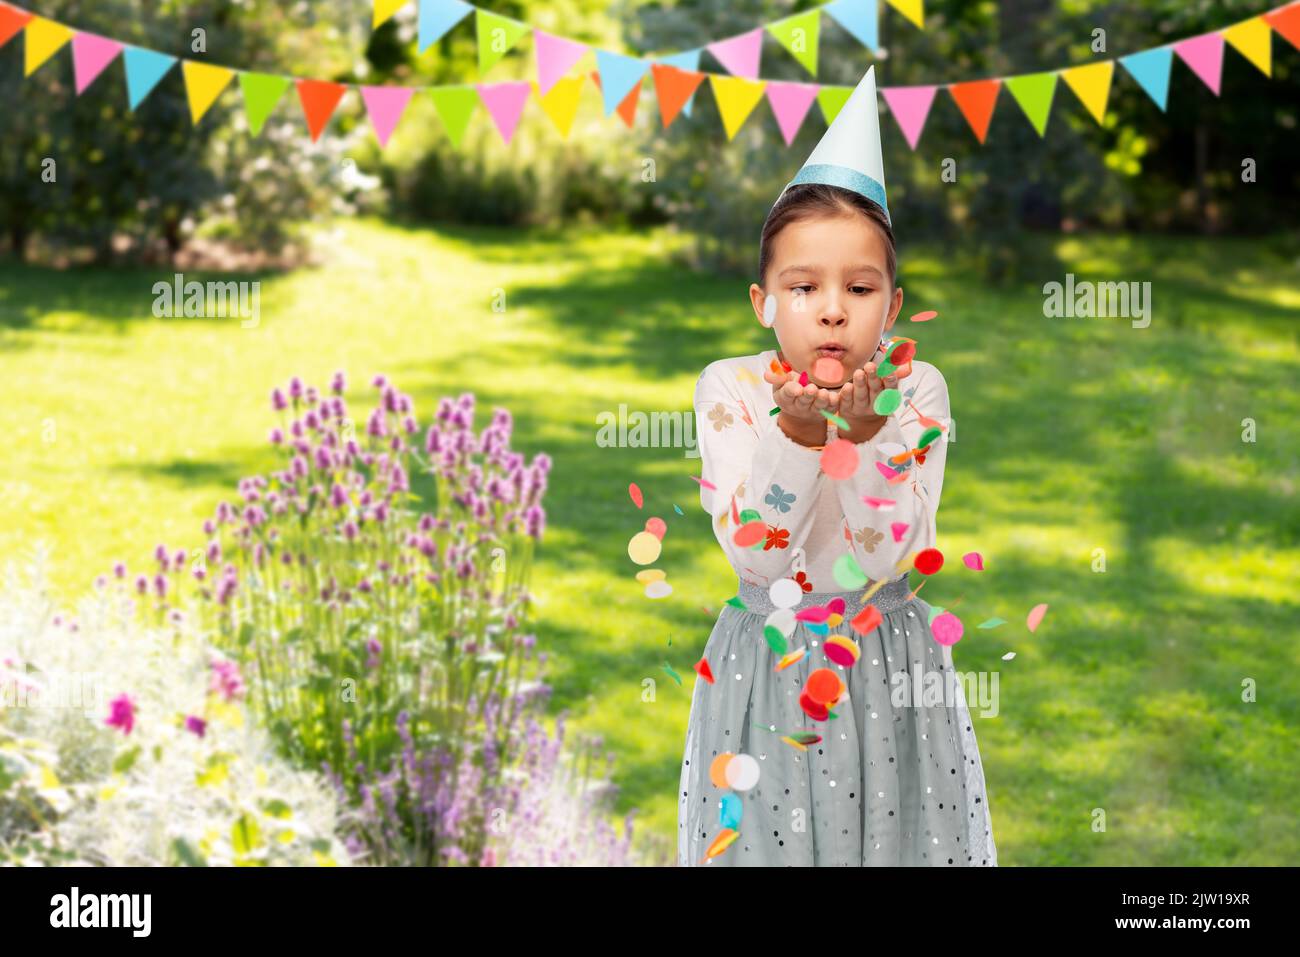 girl blowing confetti at birthday party in garden Stock Photo